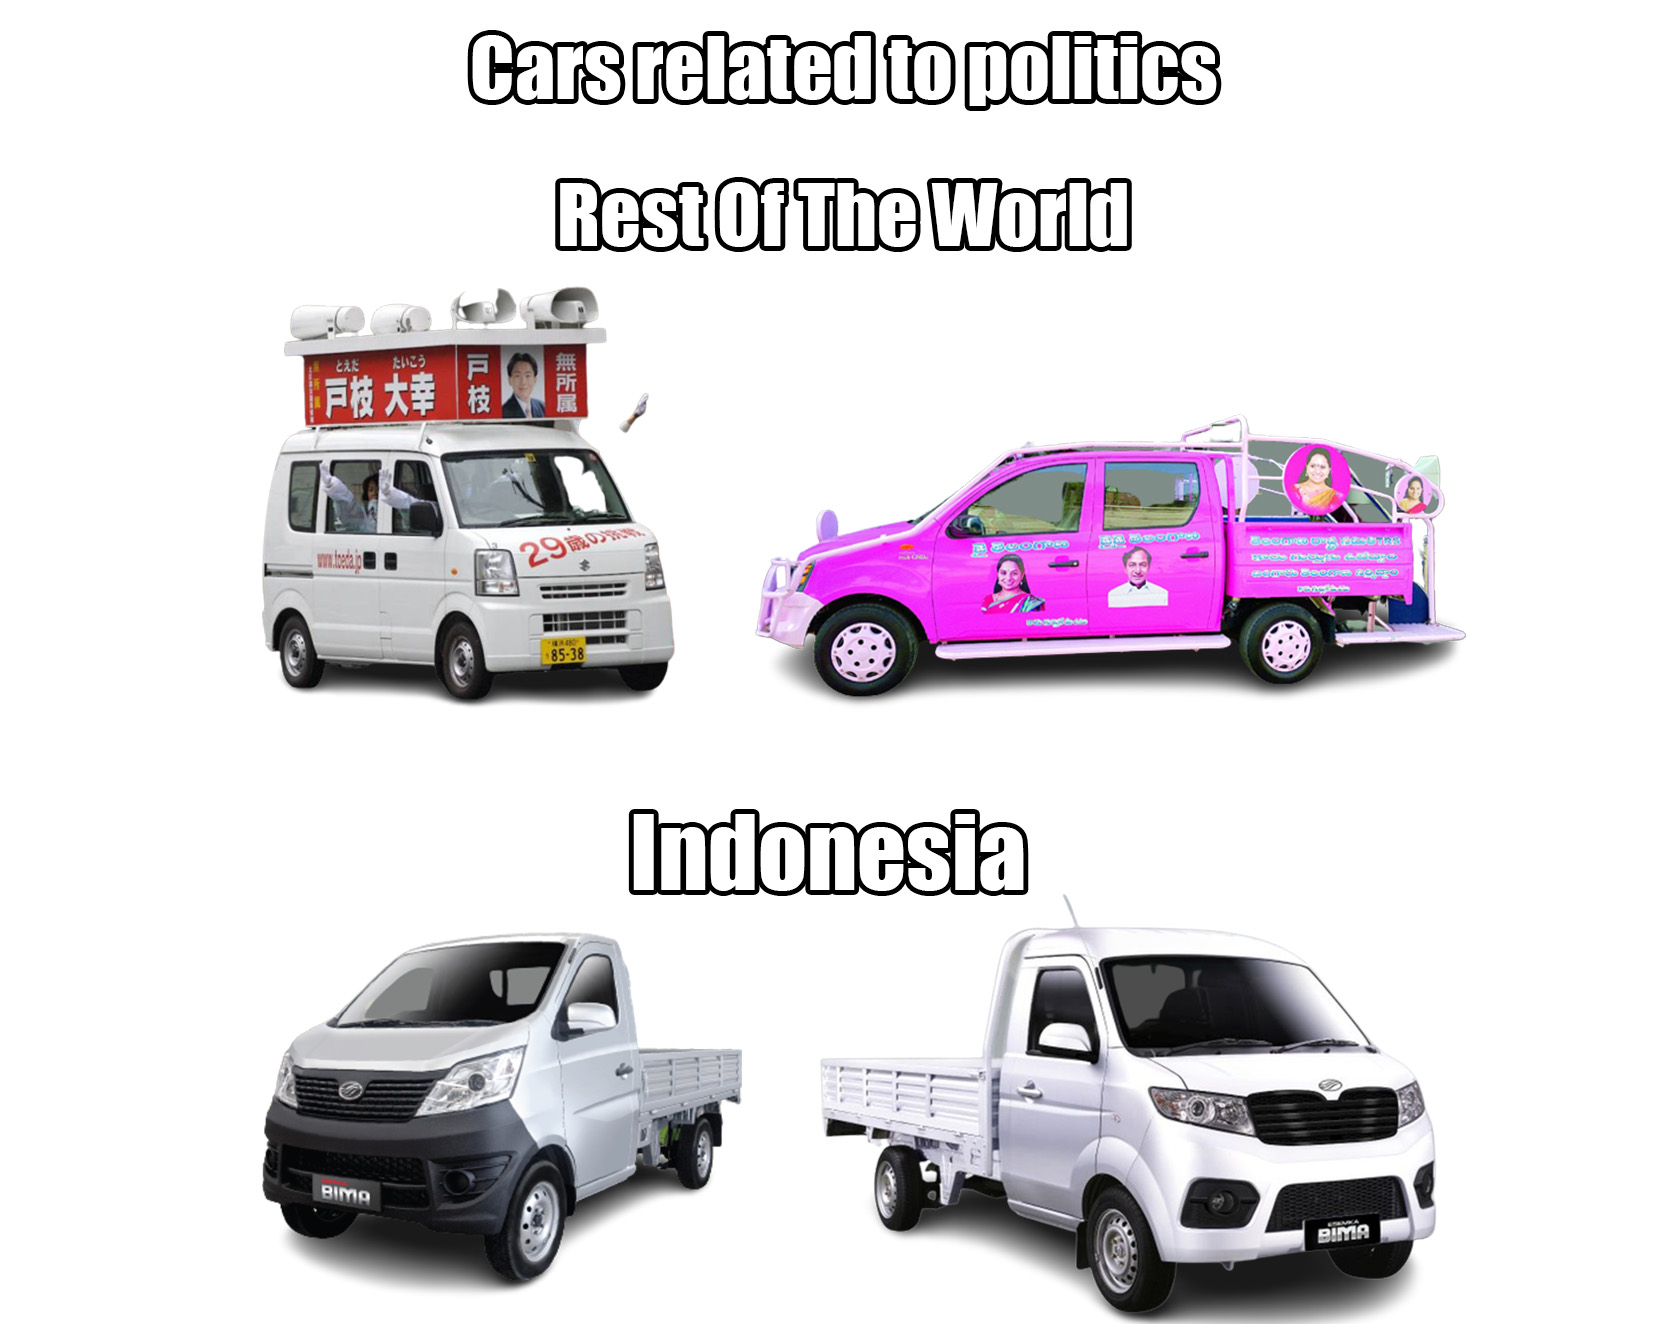 This Indonesian cars will be appear every 5 years during a large-scale political campaign